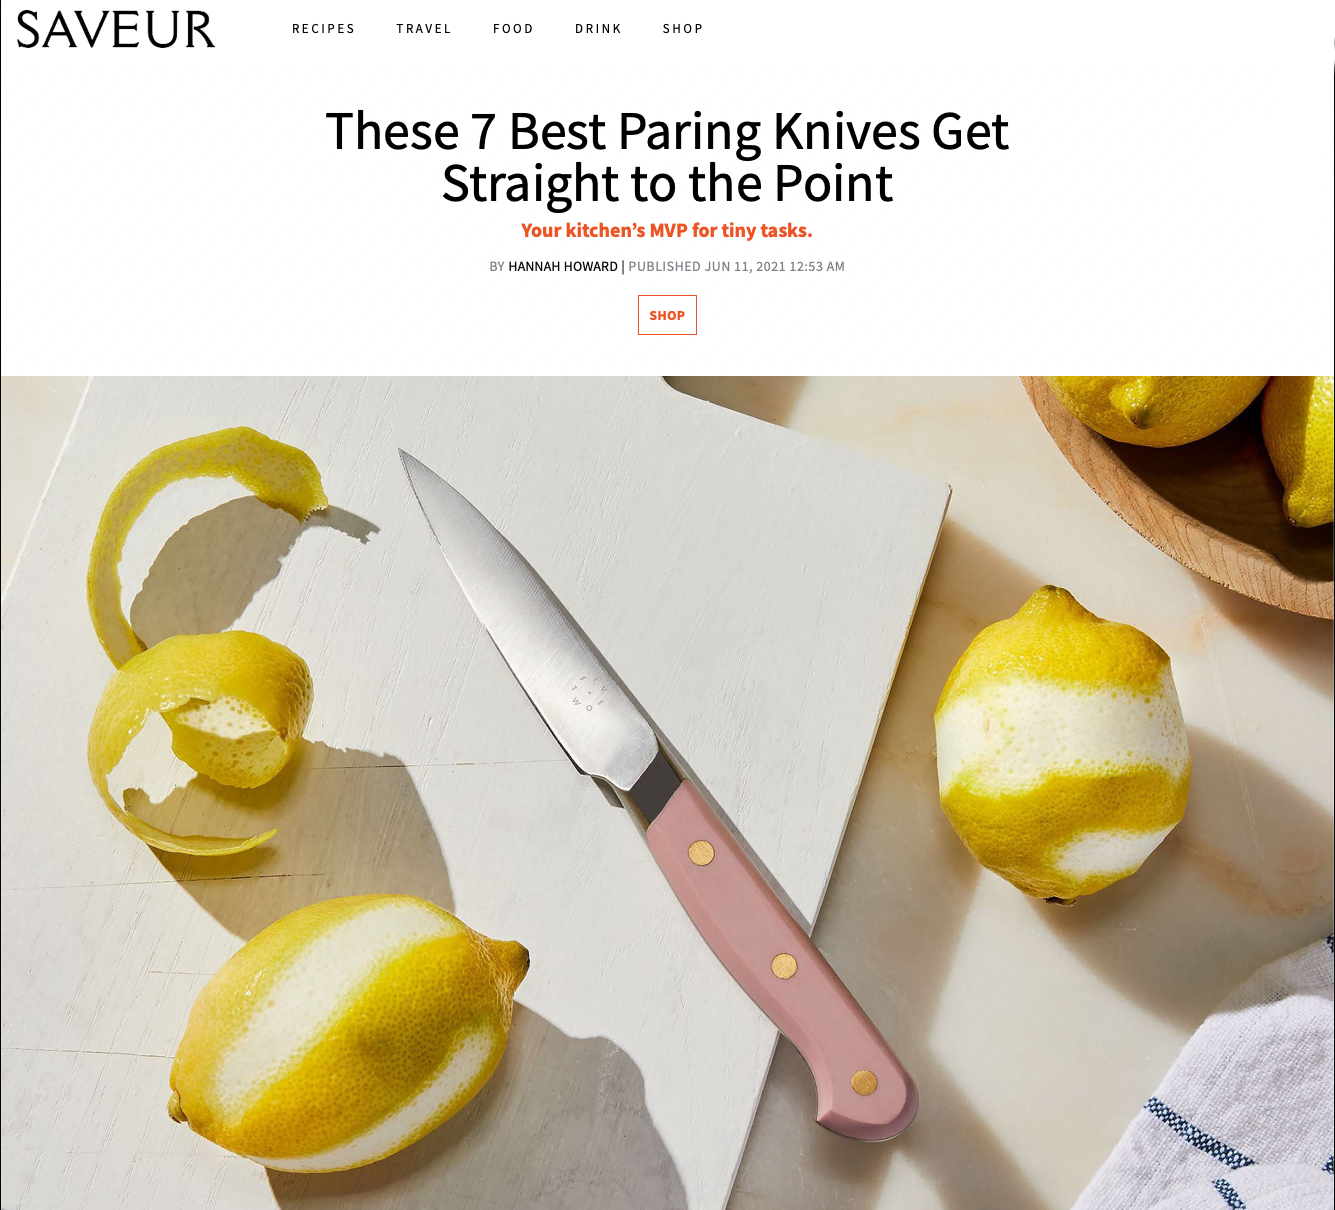 Saveur - These 7 Best Paring Knives Get Straight to the Point